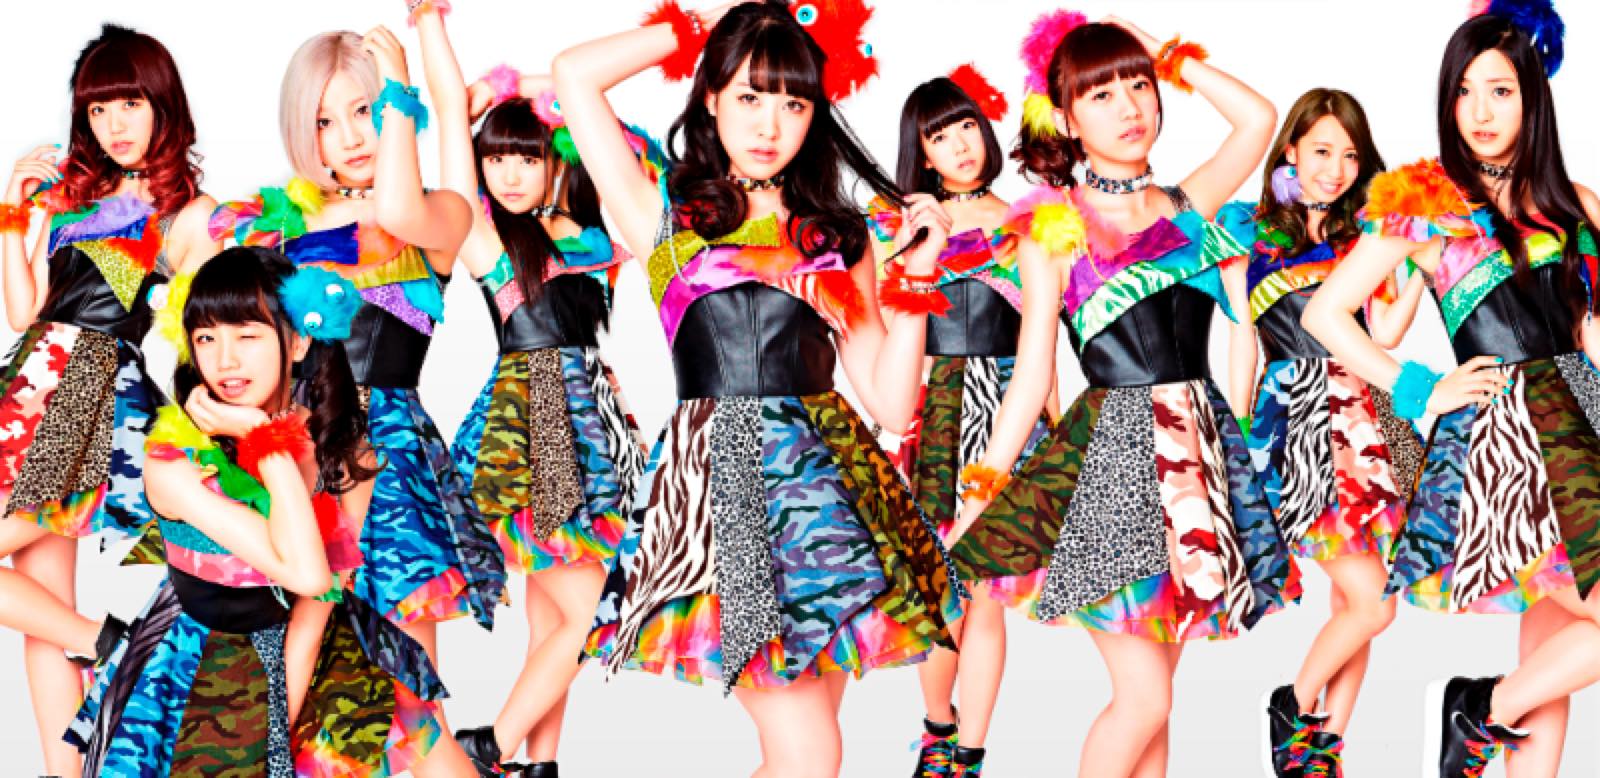 Cheeky Parade Continue to Fight to Reach the Top in the MV for “M.O.N.ST＠R”!